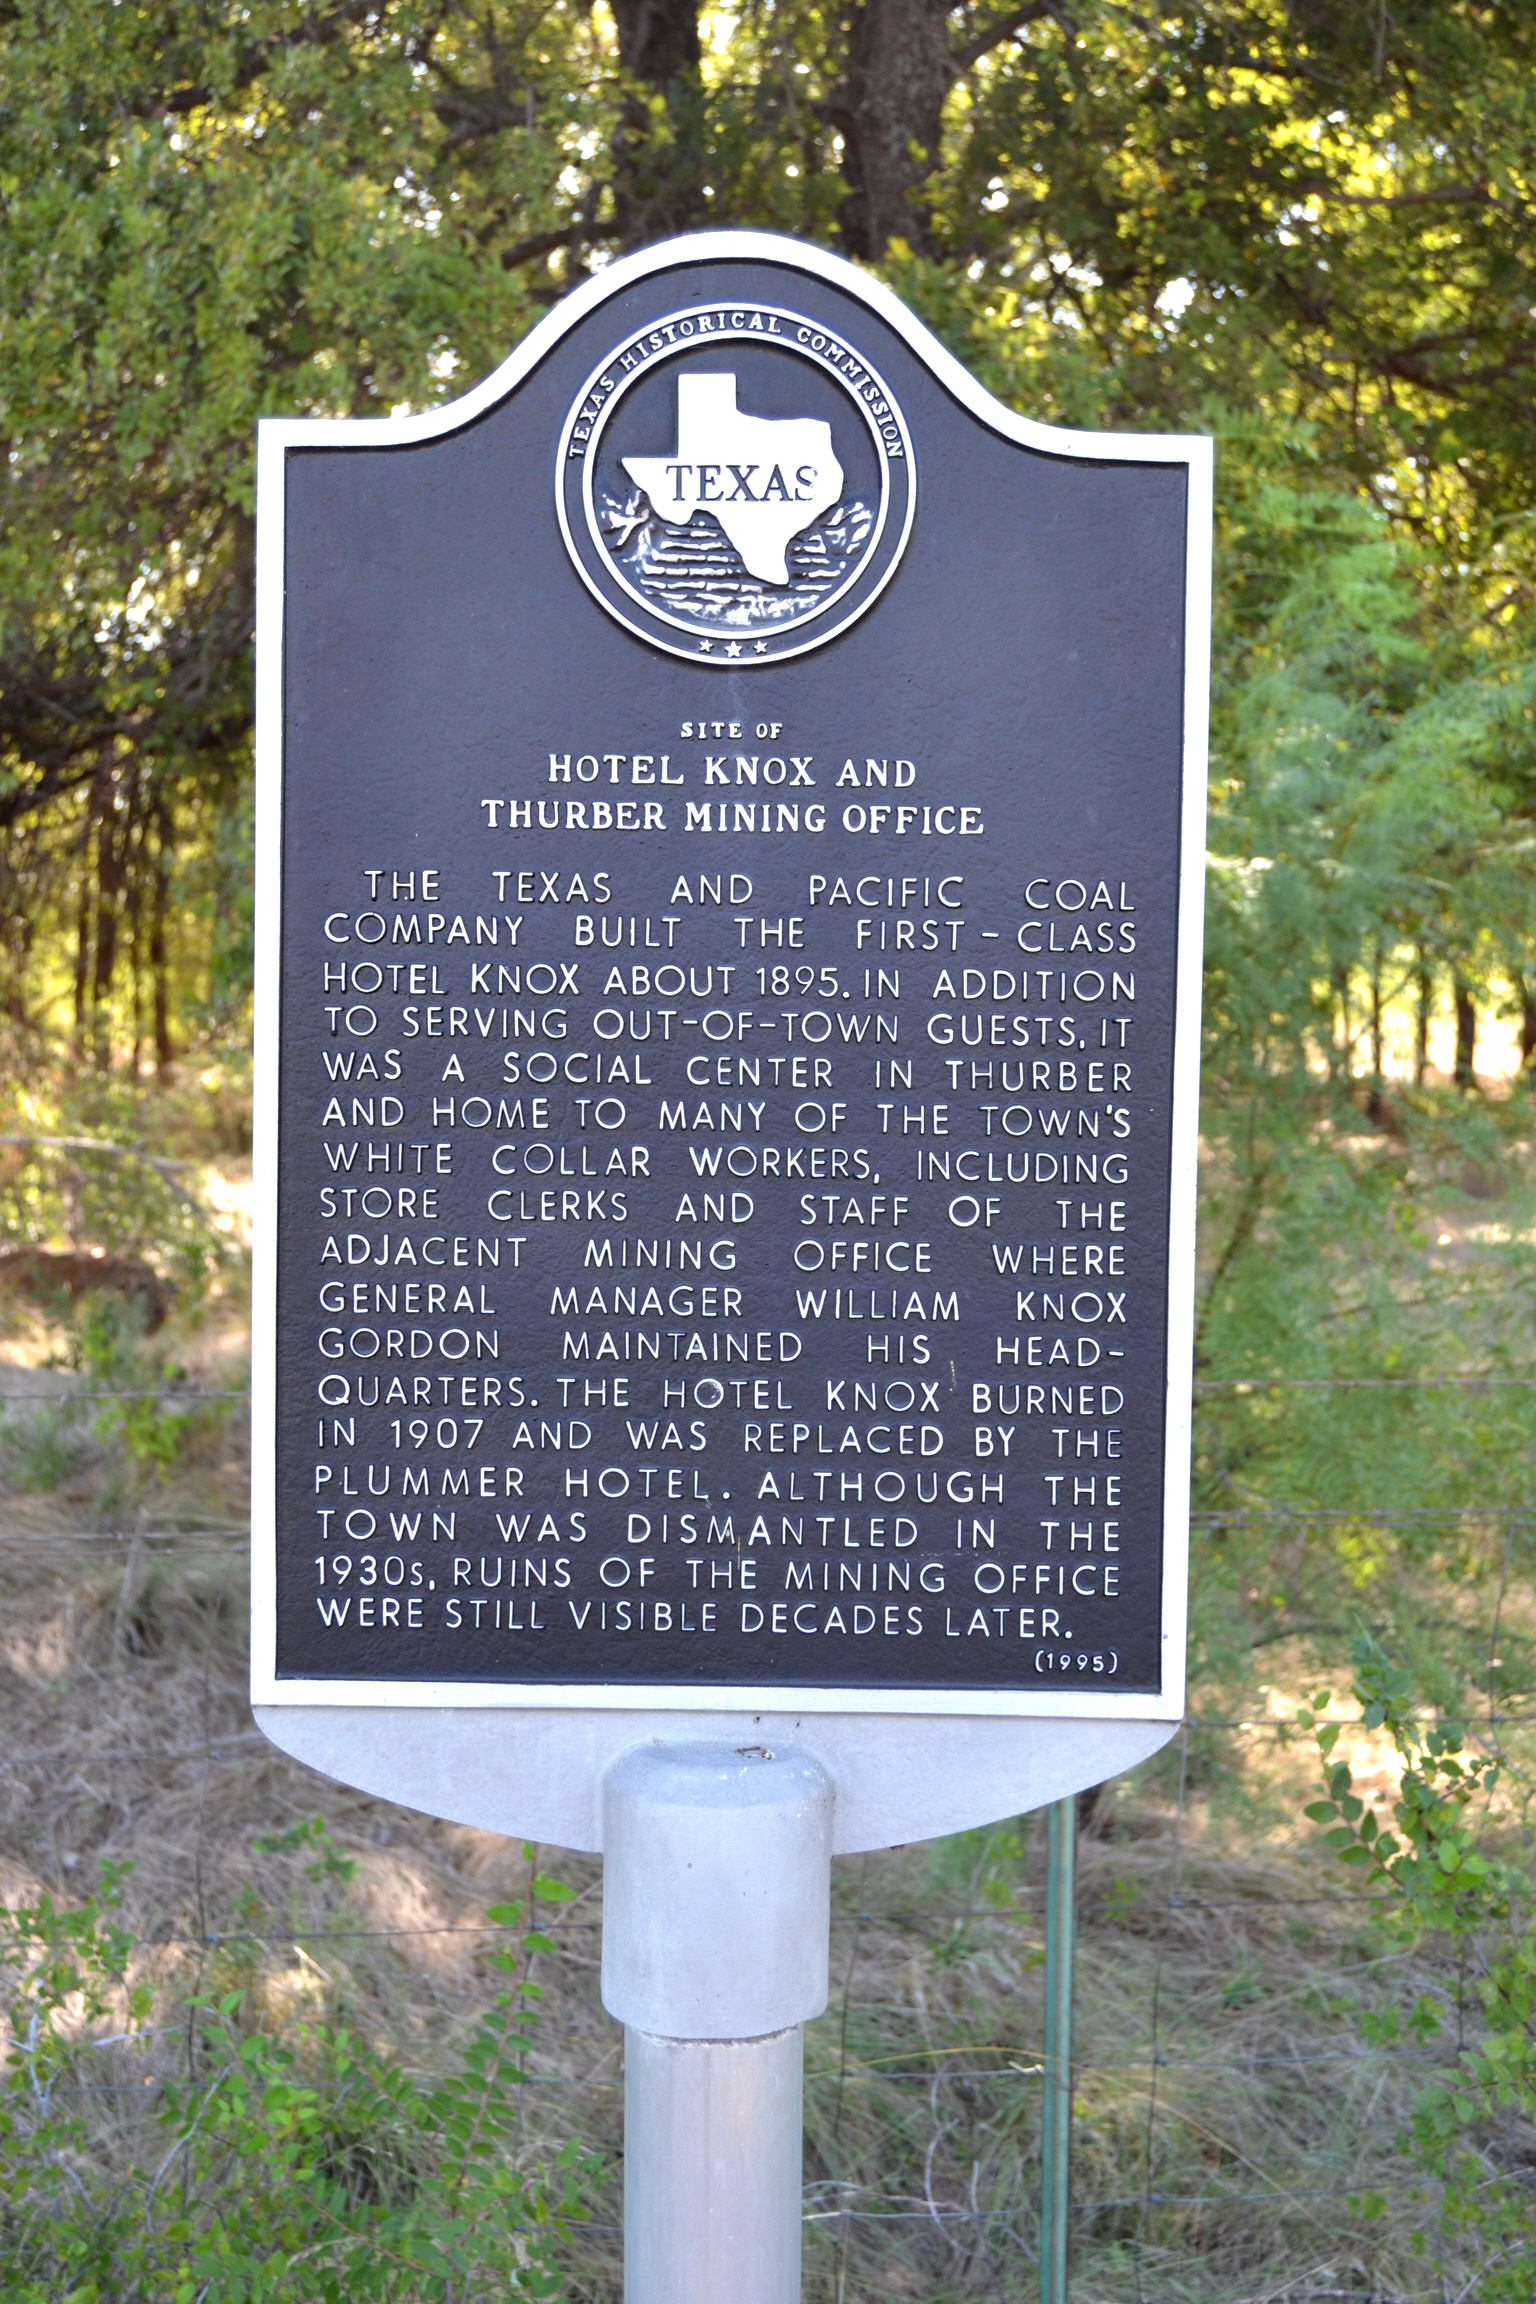 Site of Hotel Knox and Thurber Mining Office Marker